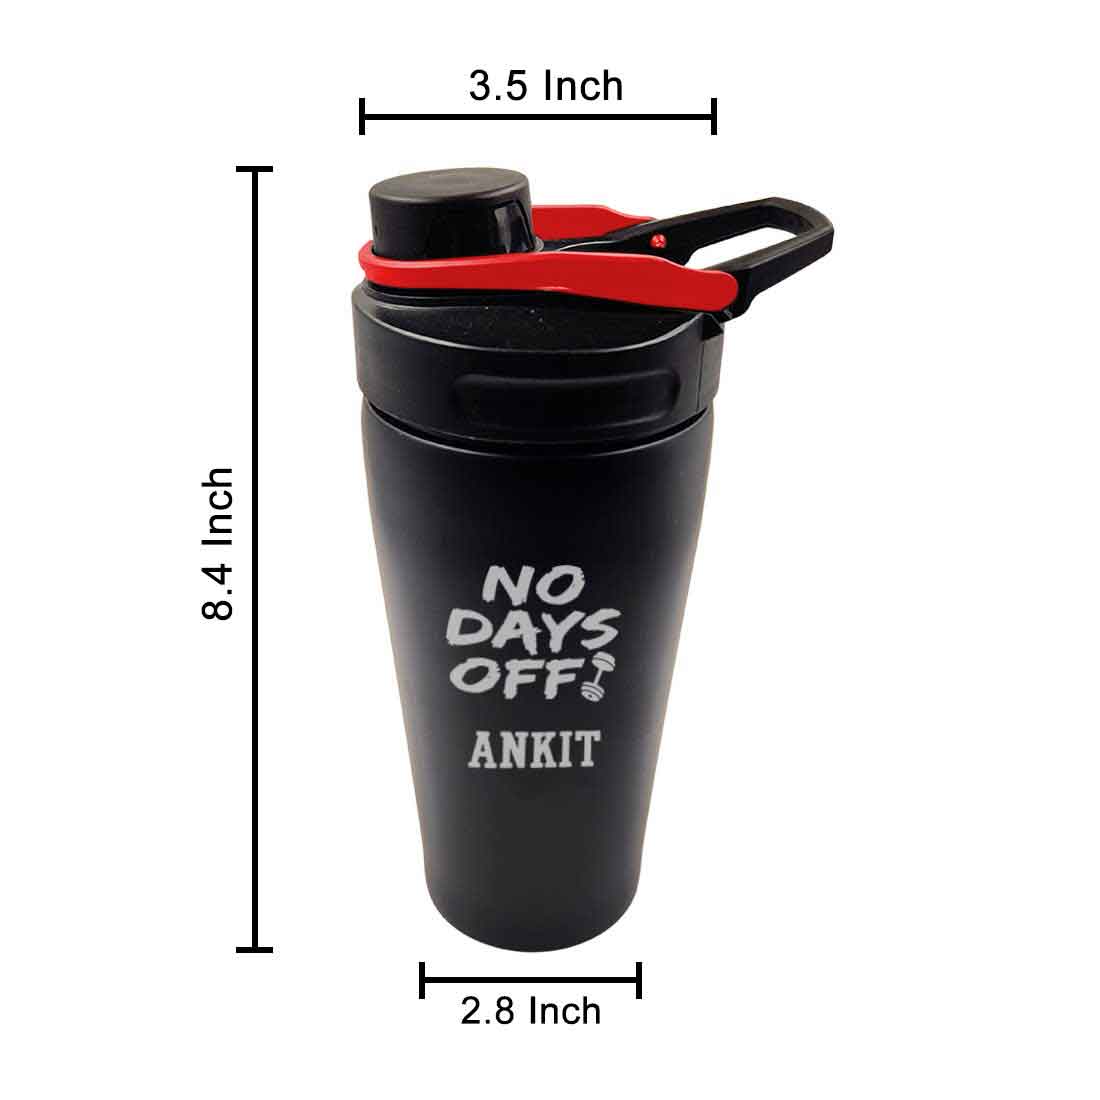 Custom Gym Protein Shaker Bottle for Protein Mixer Gym Workouts - NO DAYS OFF